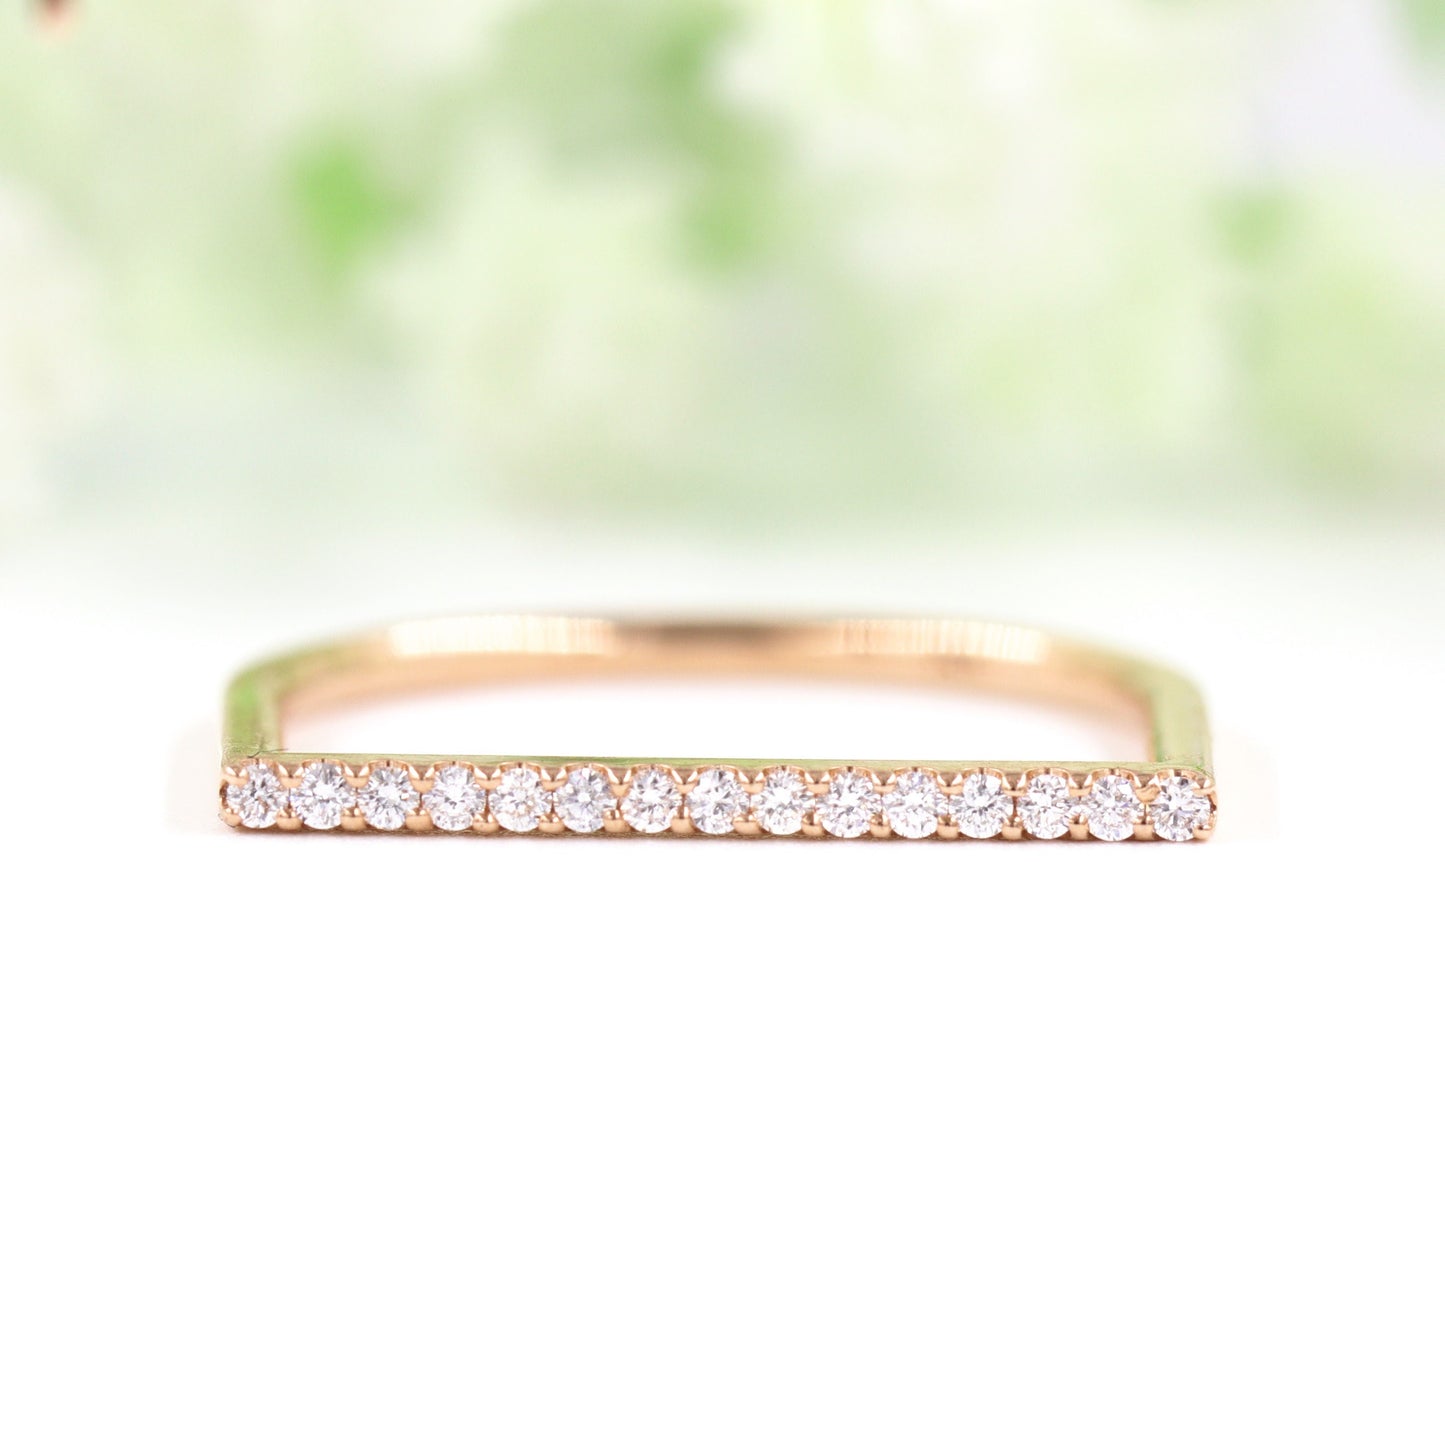 Flat Top Natural Round Diamond Ring/ D Shaped Engagement Ring/ 14K Gold Bar Diamond Ring/ Diamond Promise Ring/ Diamond Wedding Ring/Gift for her